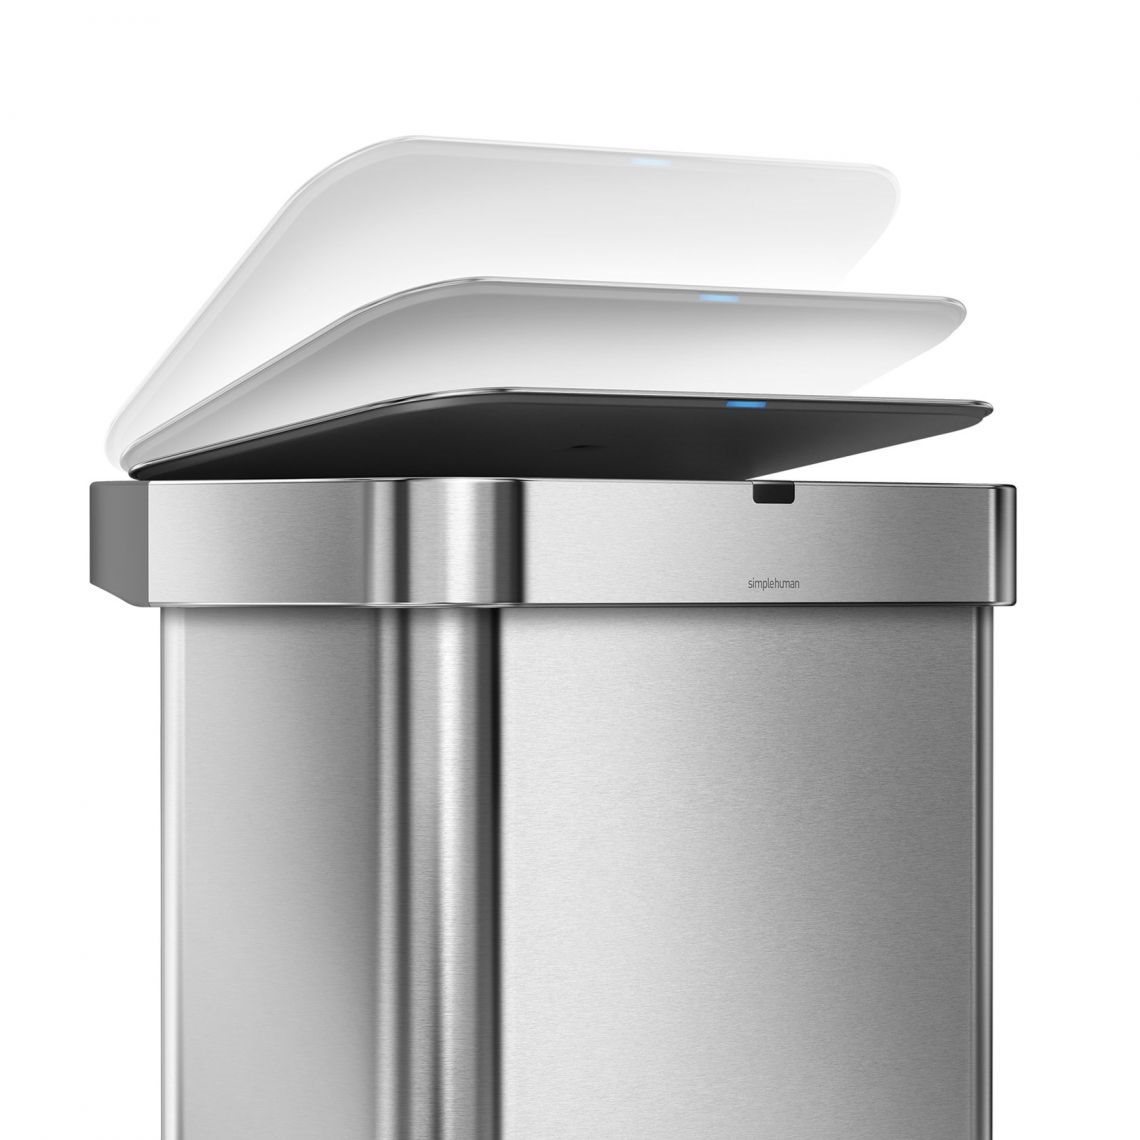 Simplehuman Sensor Can with Voice Control review 